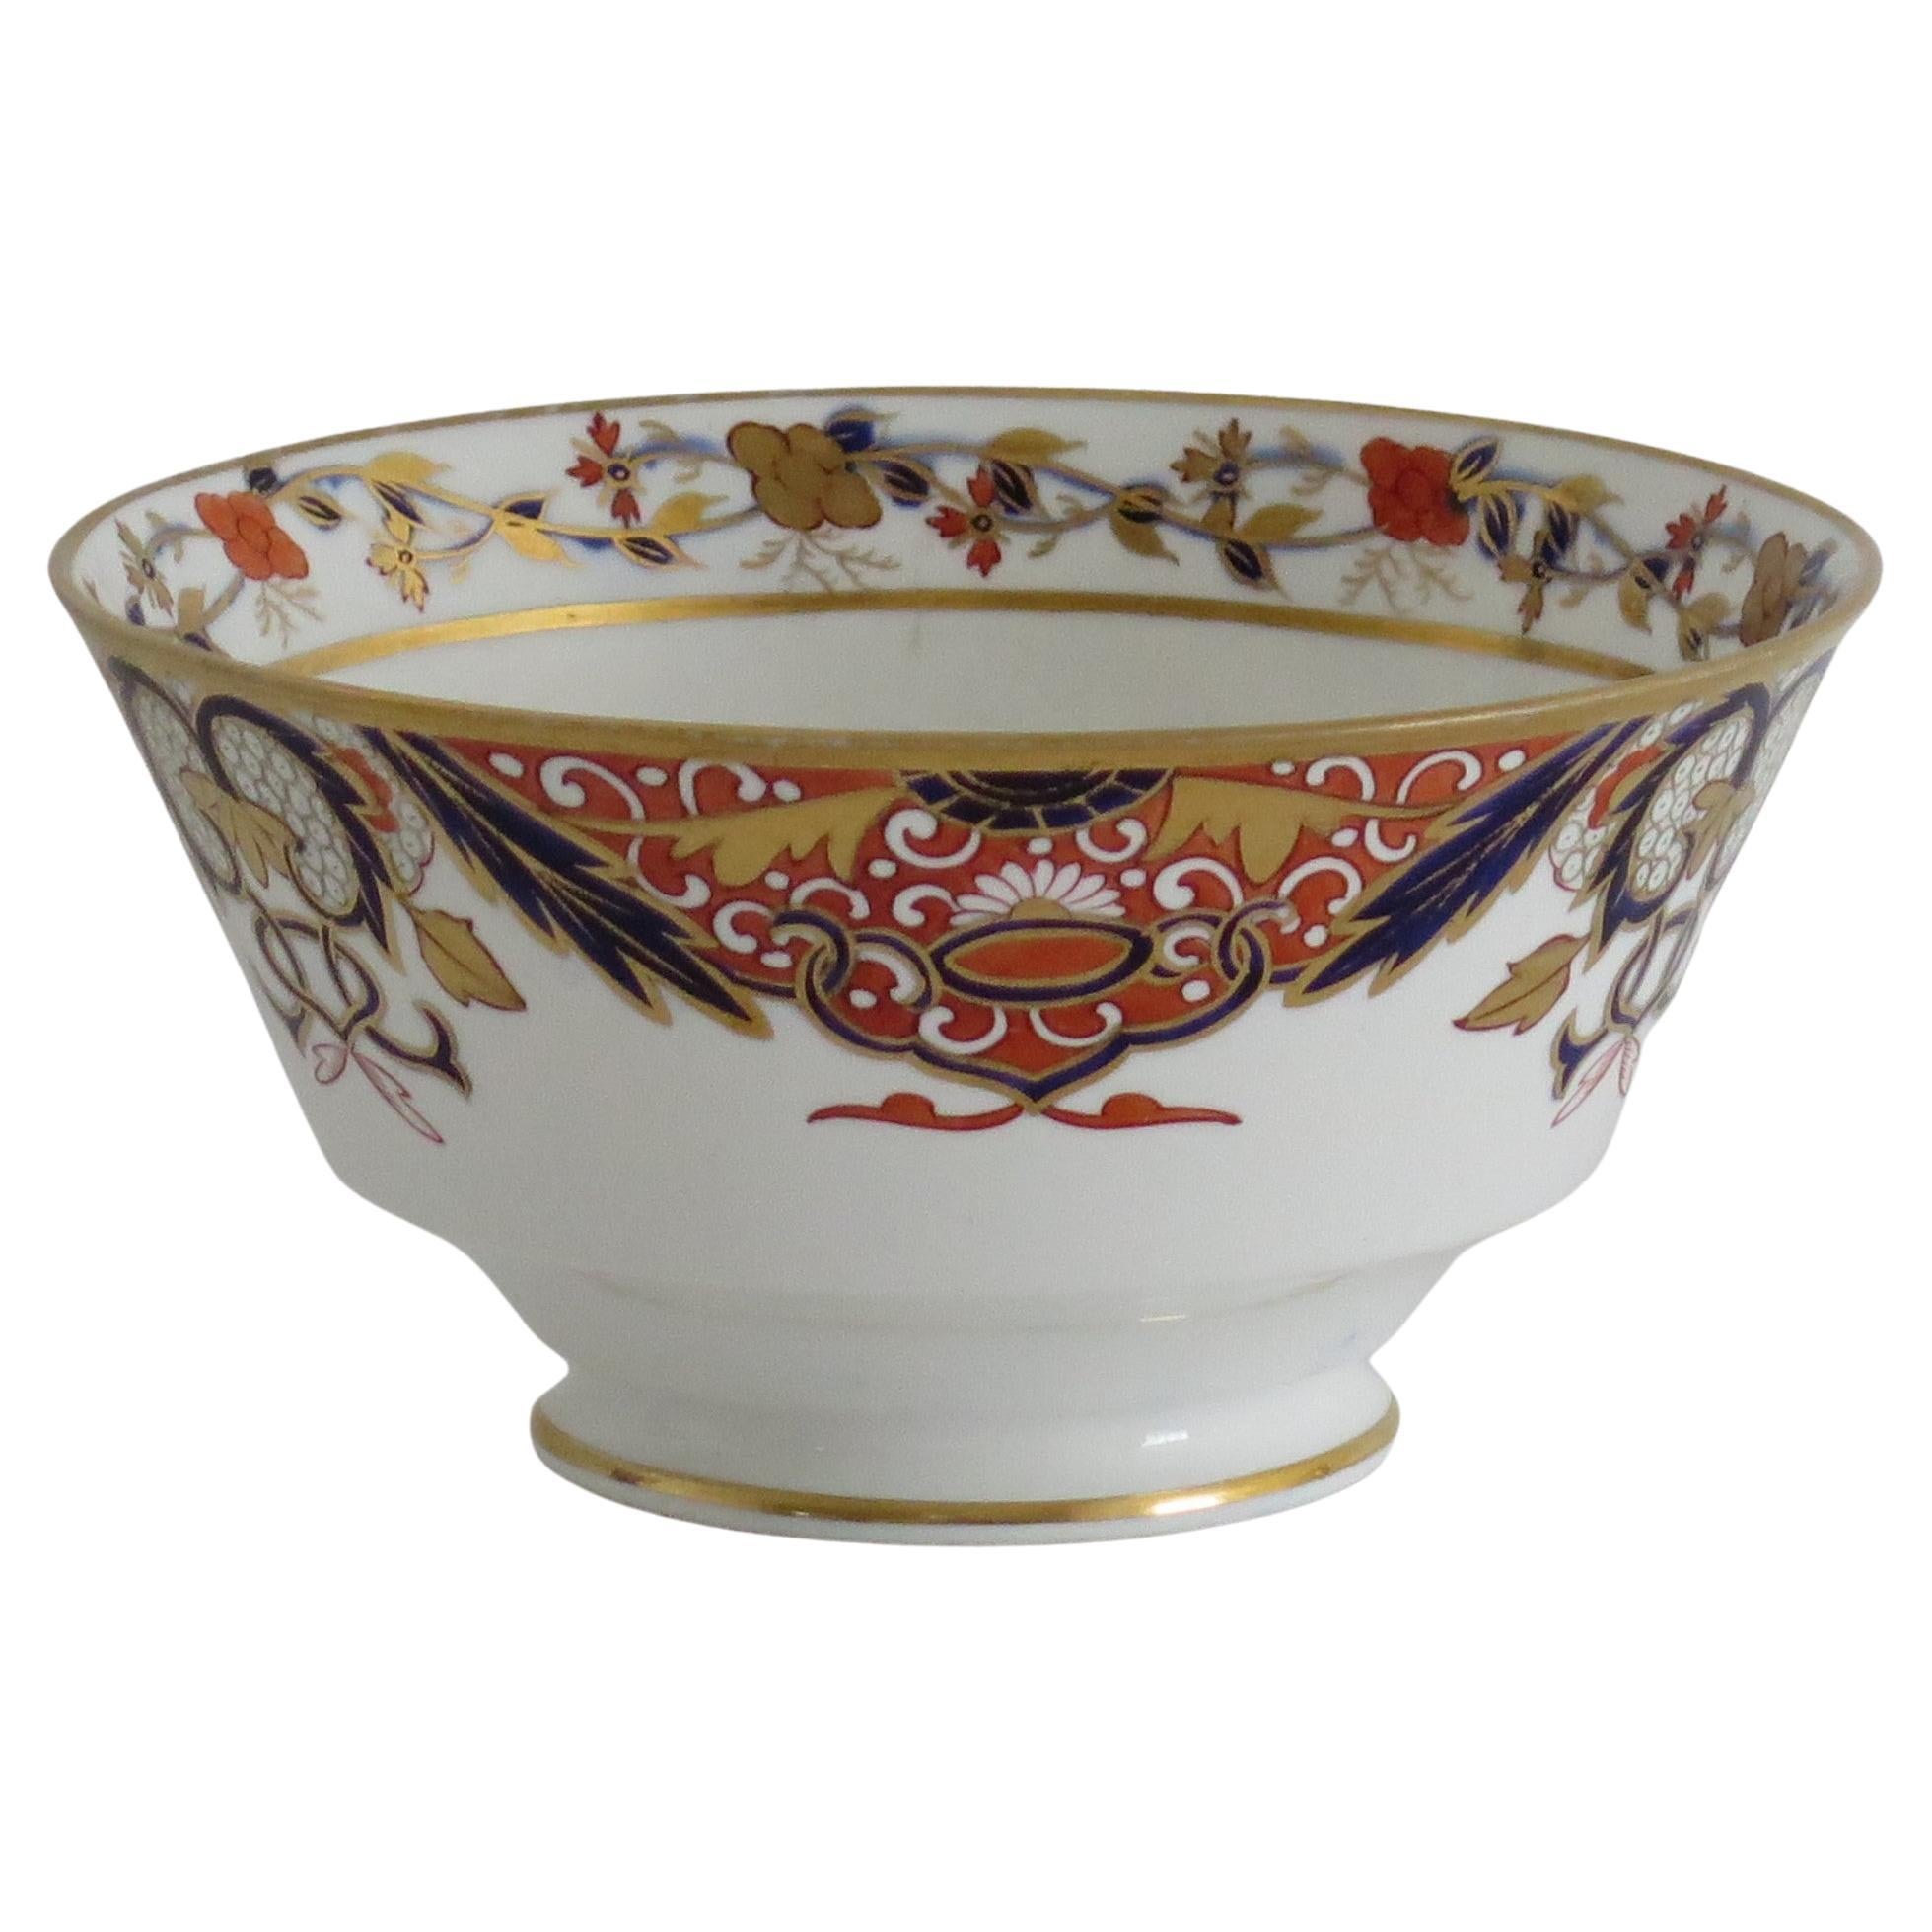 Early 19th Century Spode Porcelain Slop Bowl in Japan Ptn 1946, circa 1810